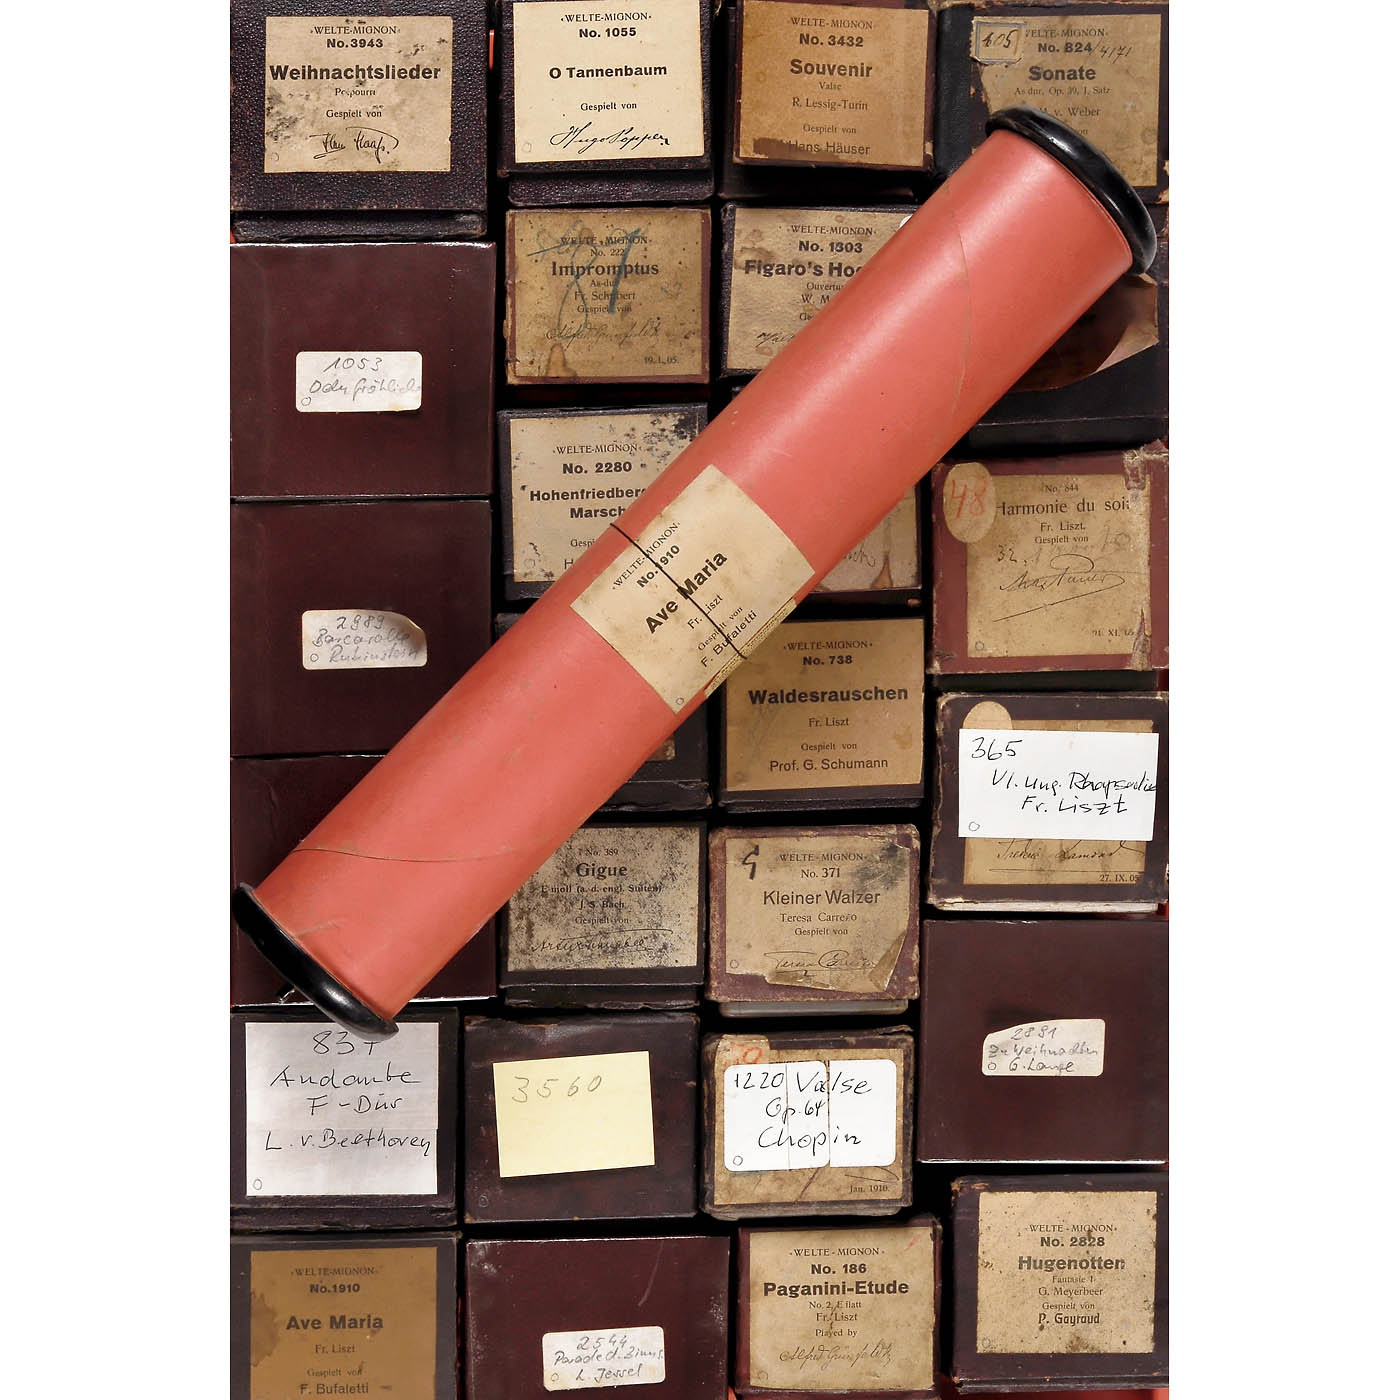 54 Welte-Mignon Reproducing Piano Rolls (T 100 -Red), 1905 onwards - Image 4 of 8